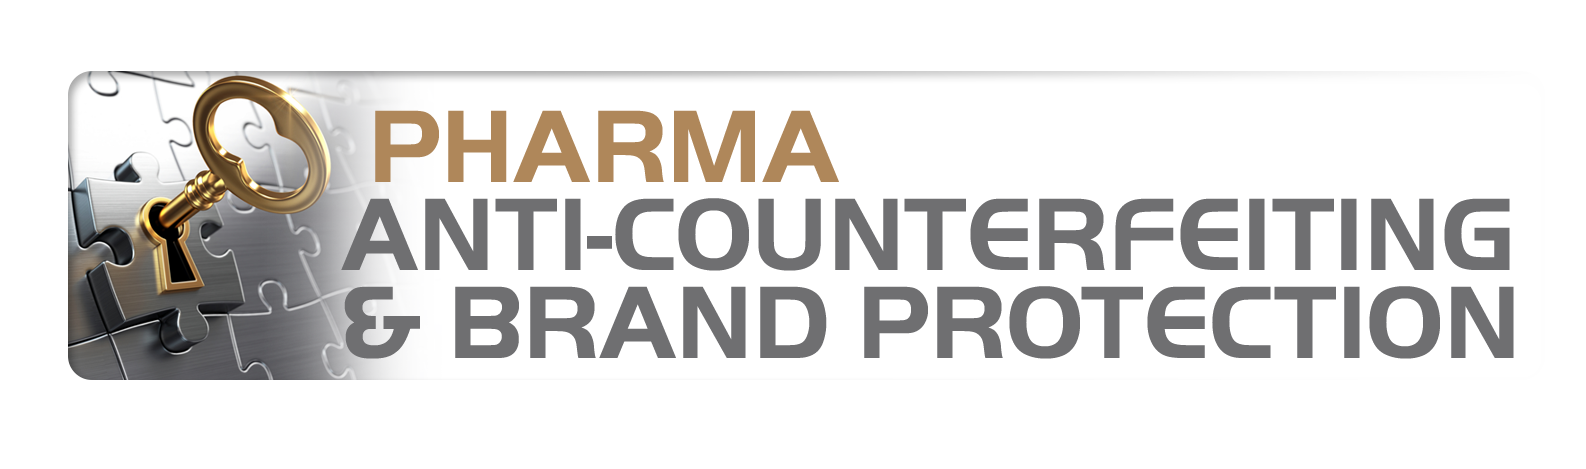 7th Anti-Counterfeiting for Pharmaceuticals Summit